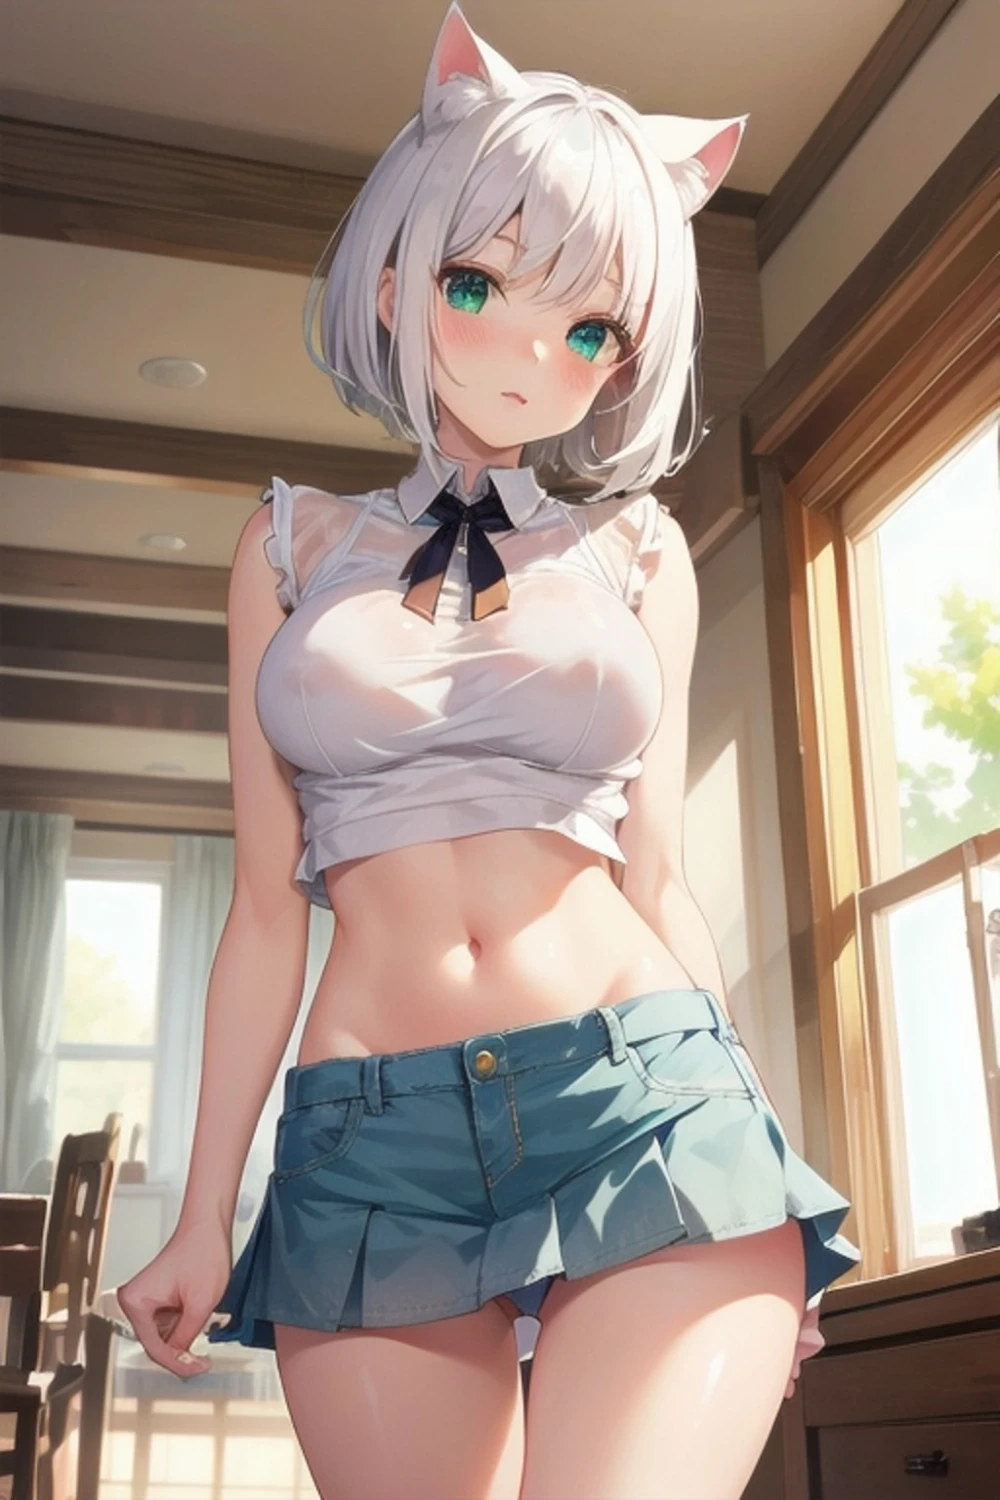 midriff-anime-style-all-ages-36